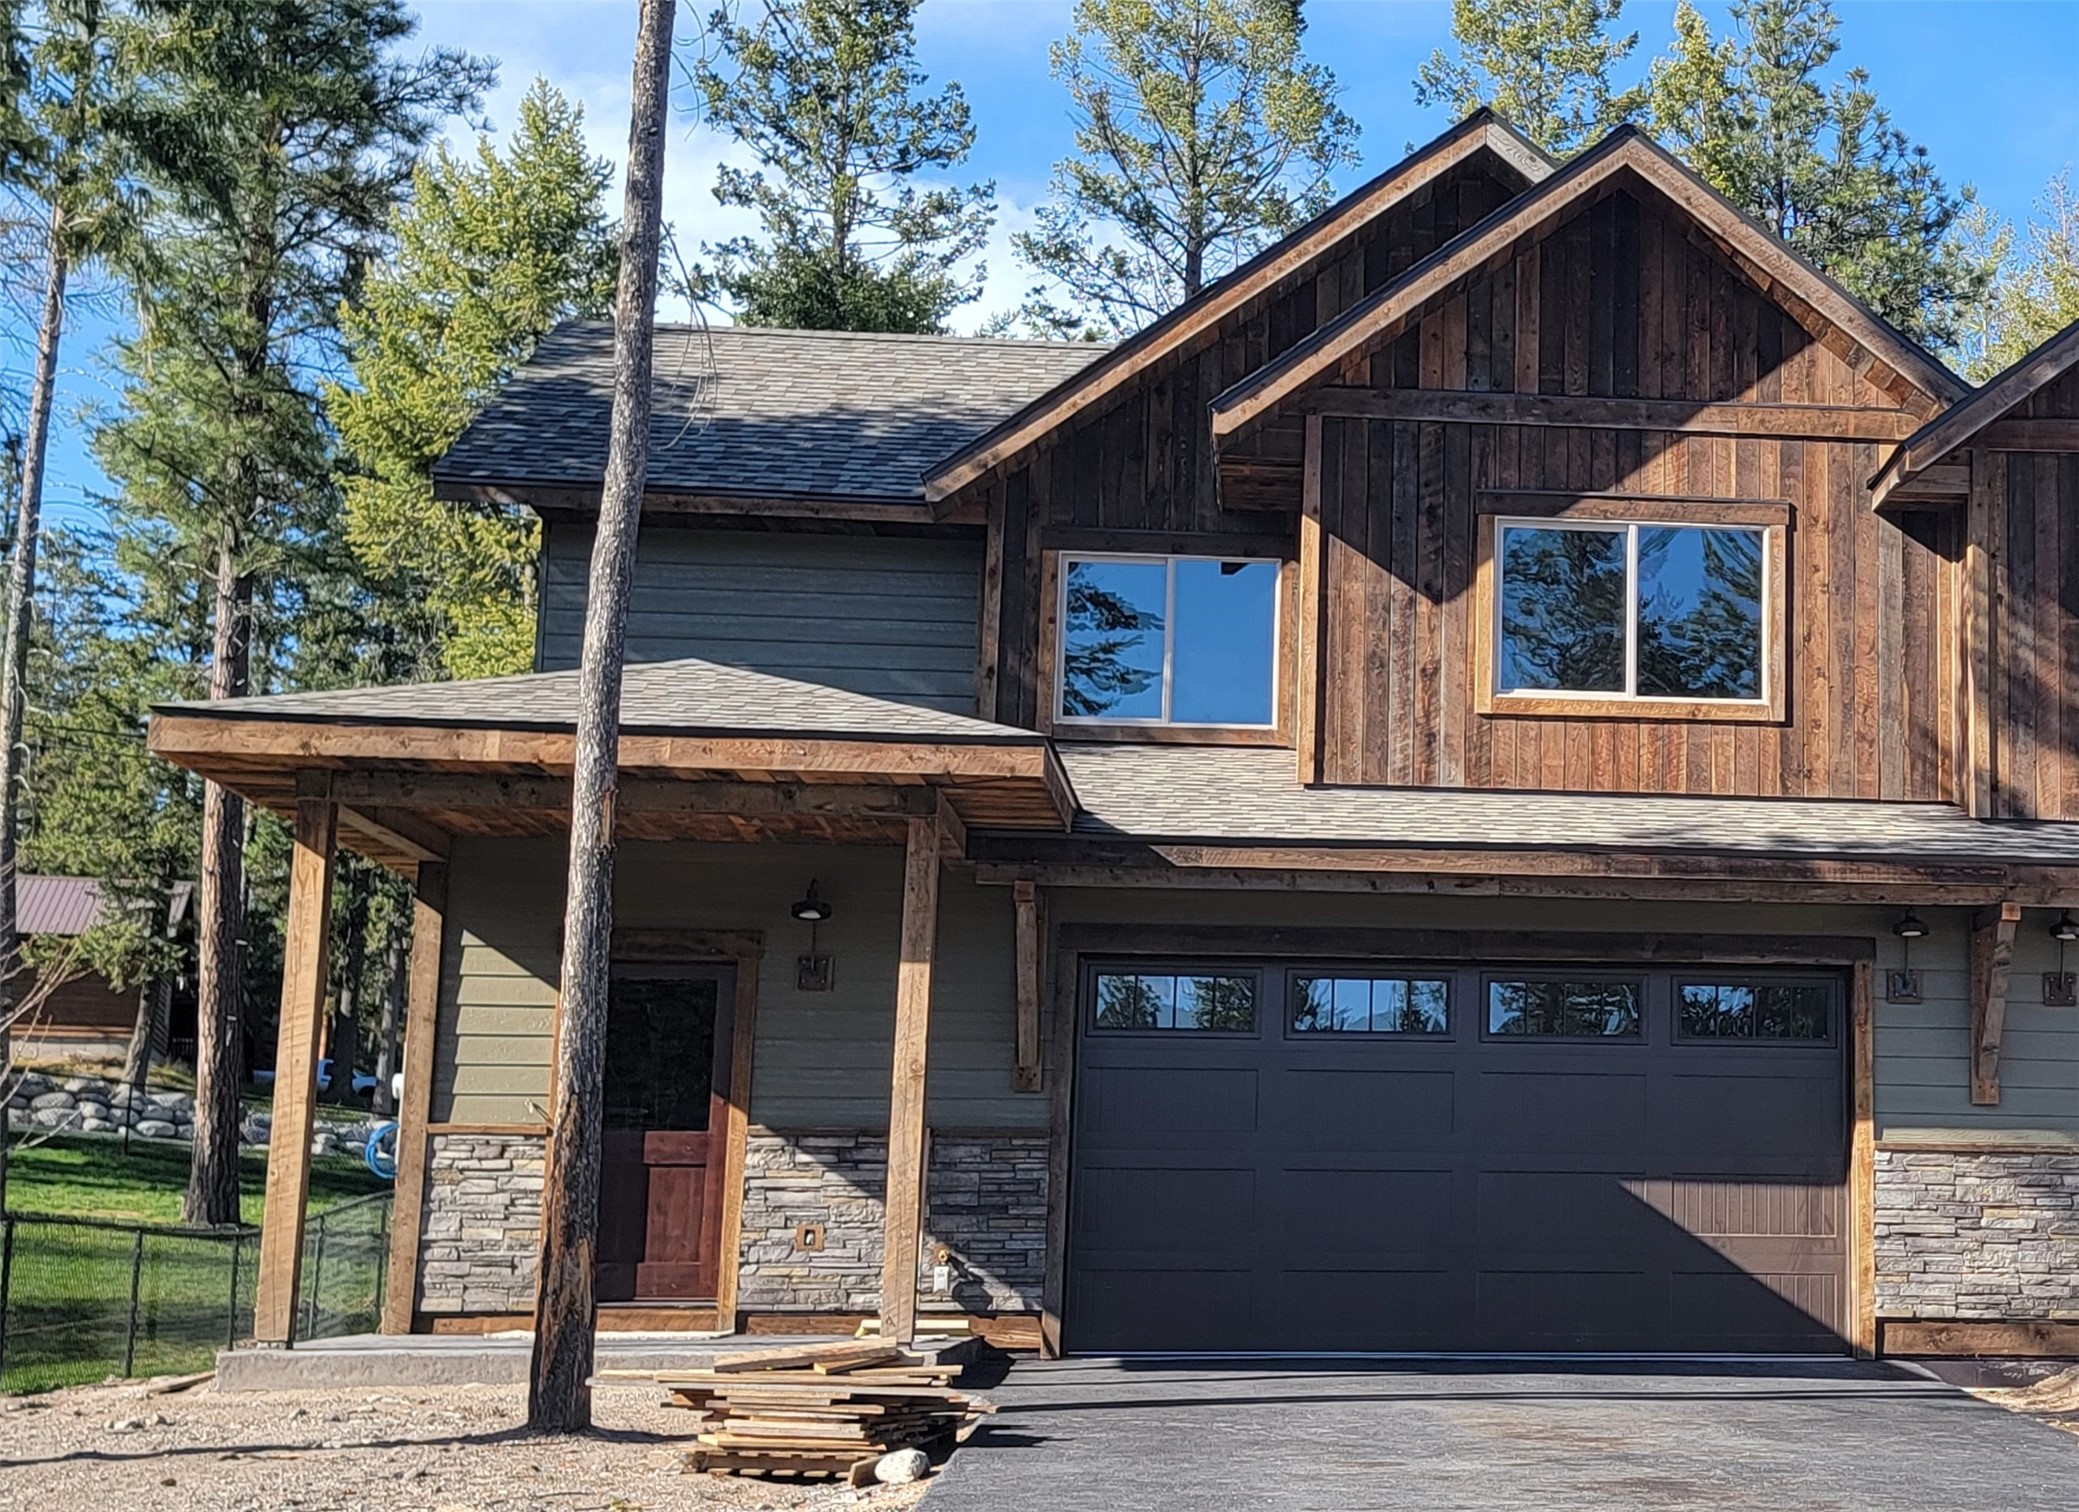 Brand new construction just minutes from Flathead Lake in Lakeside. This beautiful and spacious 3 bedroom, 2.5 bath townhome features solid alder doors throughout, wide plank oak floors in the entry, kitchen and living room, and tile in the baths. The master is located on the main level with ensuite bathroom, walk in closet and sliding glass door to the patio. The kitchen features vaulted ceilings, quartz countertops, hickory cabinets and under cabinet lighting. The living room has a cozy electric fireplace and sliding glass doors leading out to the patio and back yard. Upstairs you will find a loft area with vaulted ceilings, a full bathroom as well as two more bedrooms, one could be a second master with an ensuite bathroom and large walk in closet. With ample closet space, high ceilings, large rooms, tons of windows, large wooded back yard and such high quality construction, this home is a must see! Call Susan  Nicely at 406-300-4131 or your real estate professional today!